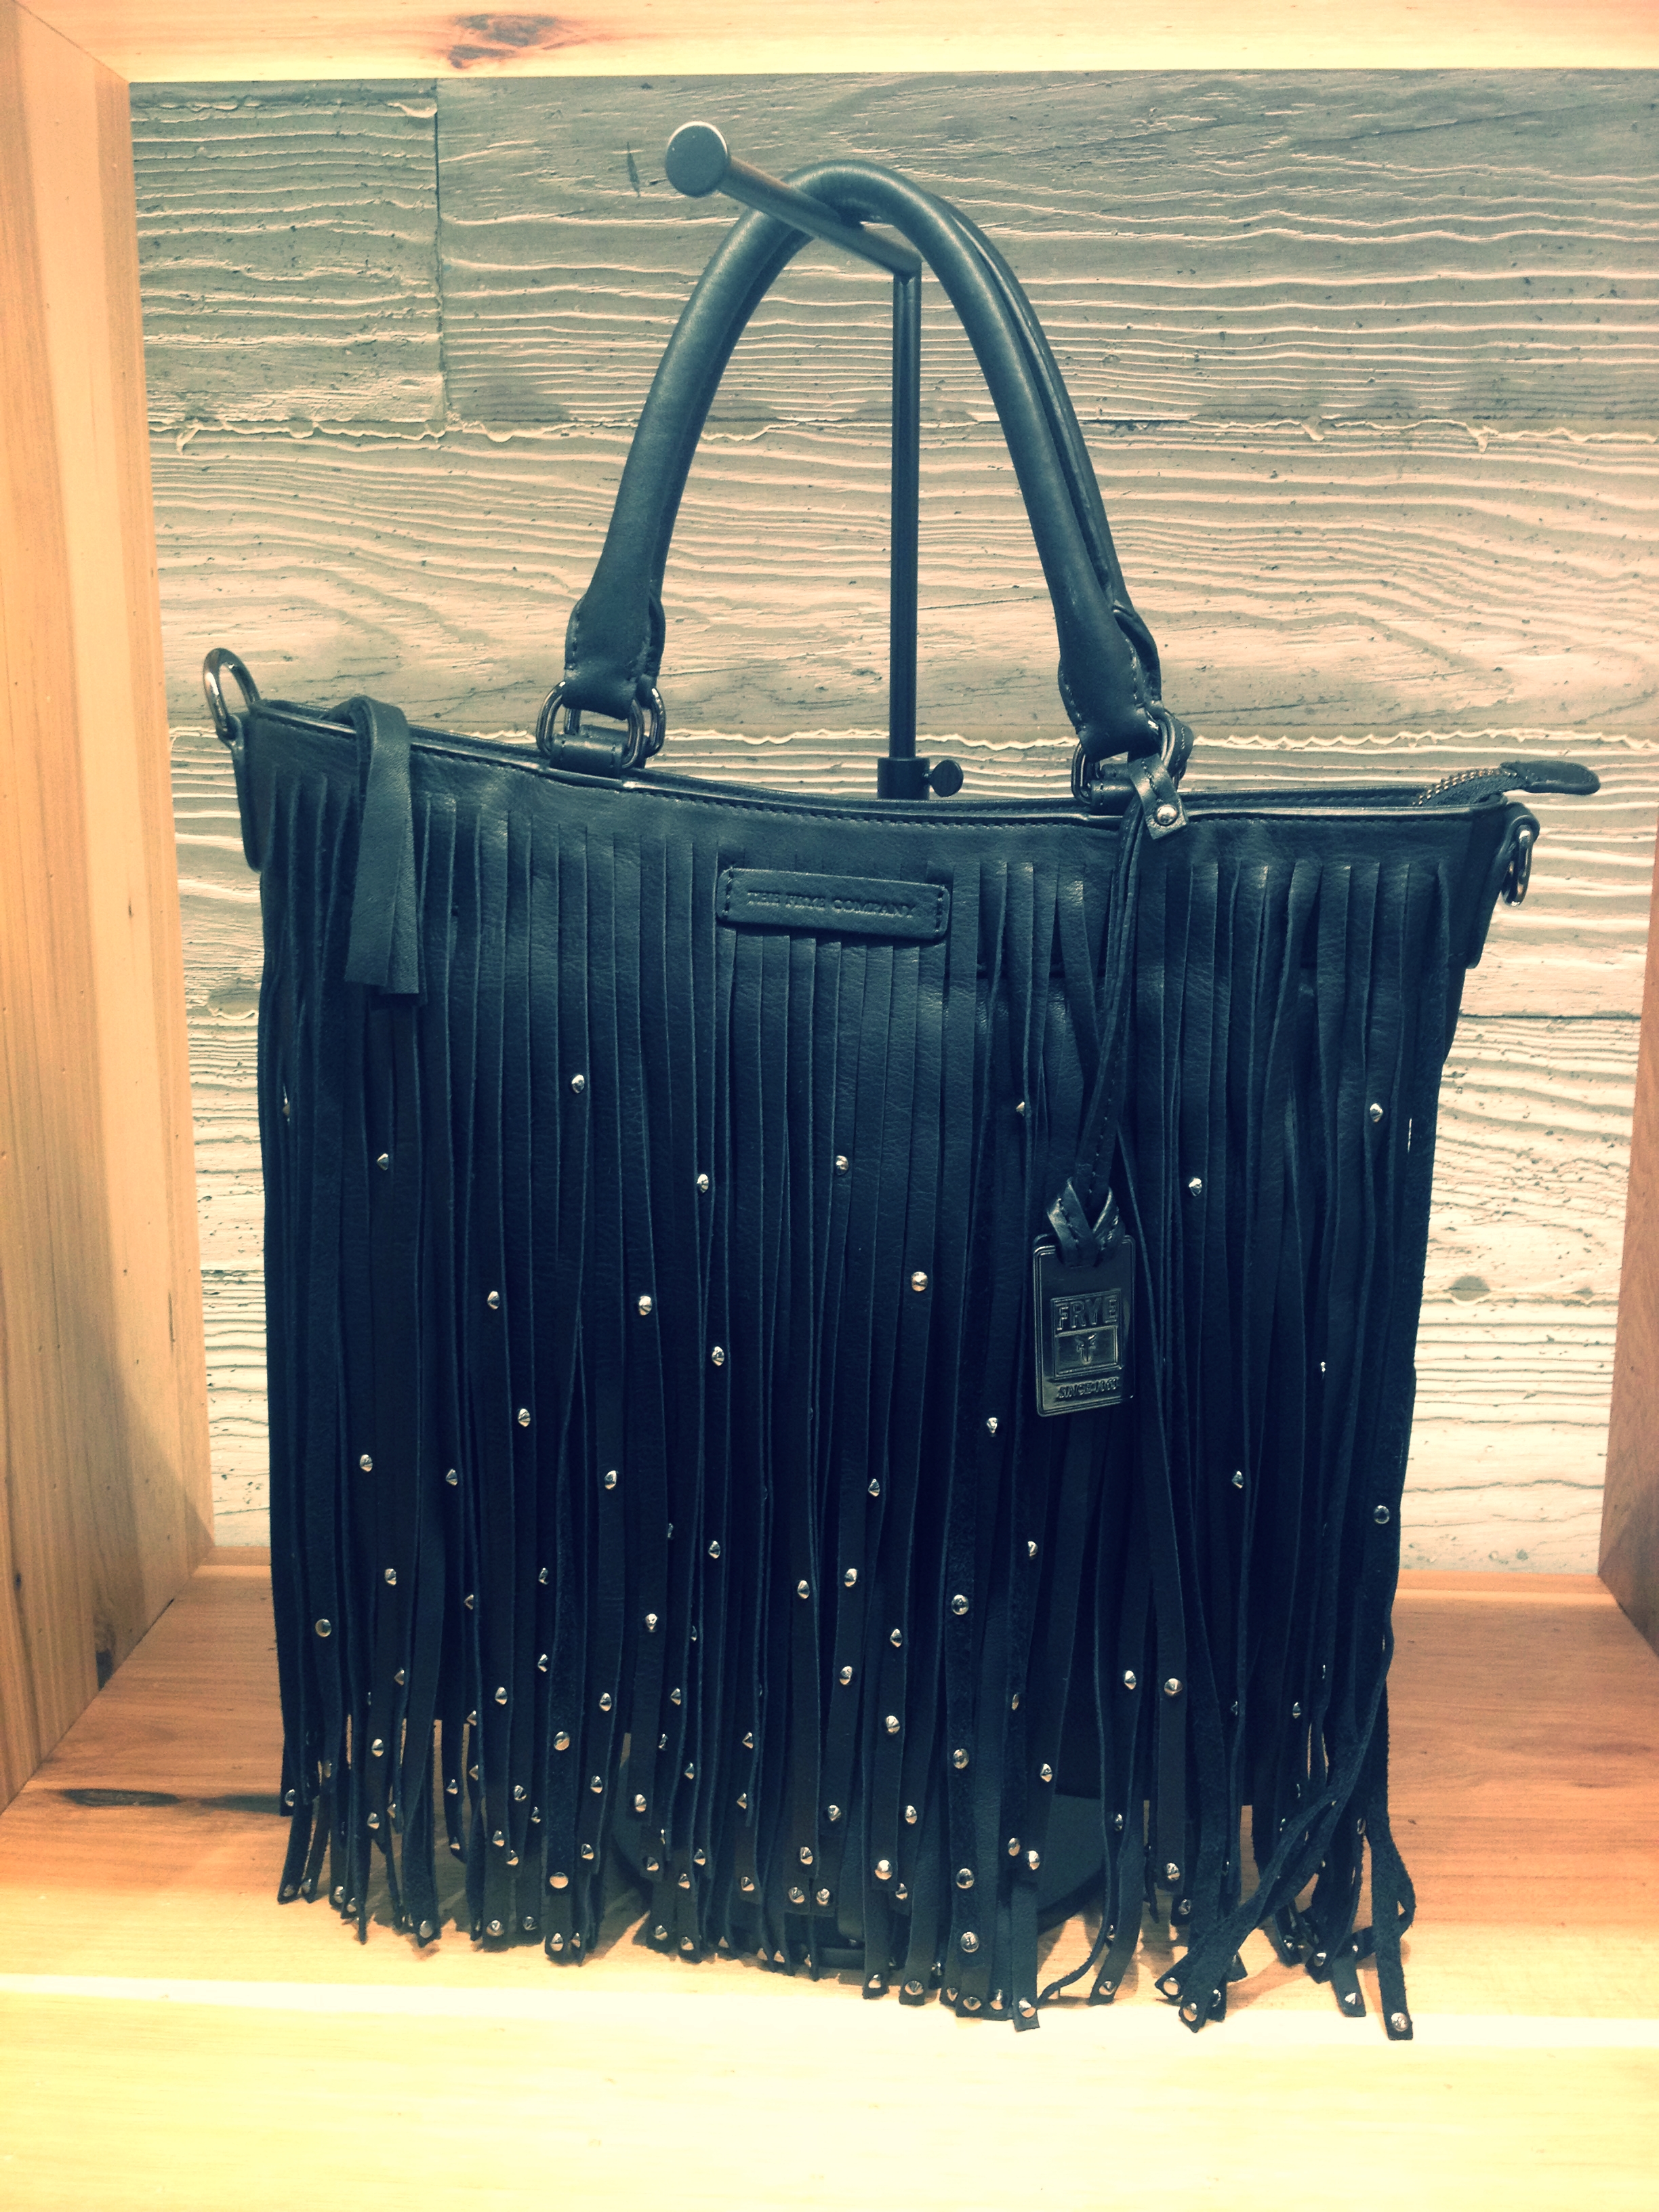  Ladies, you'll LOVE the fringe on bags and shoes! 